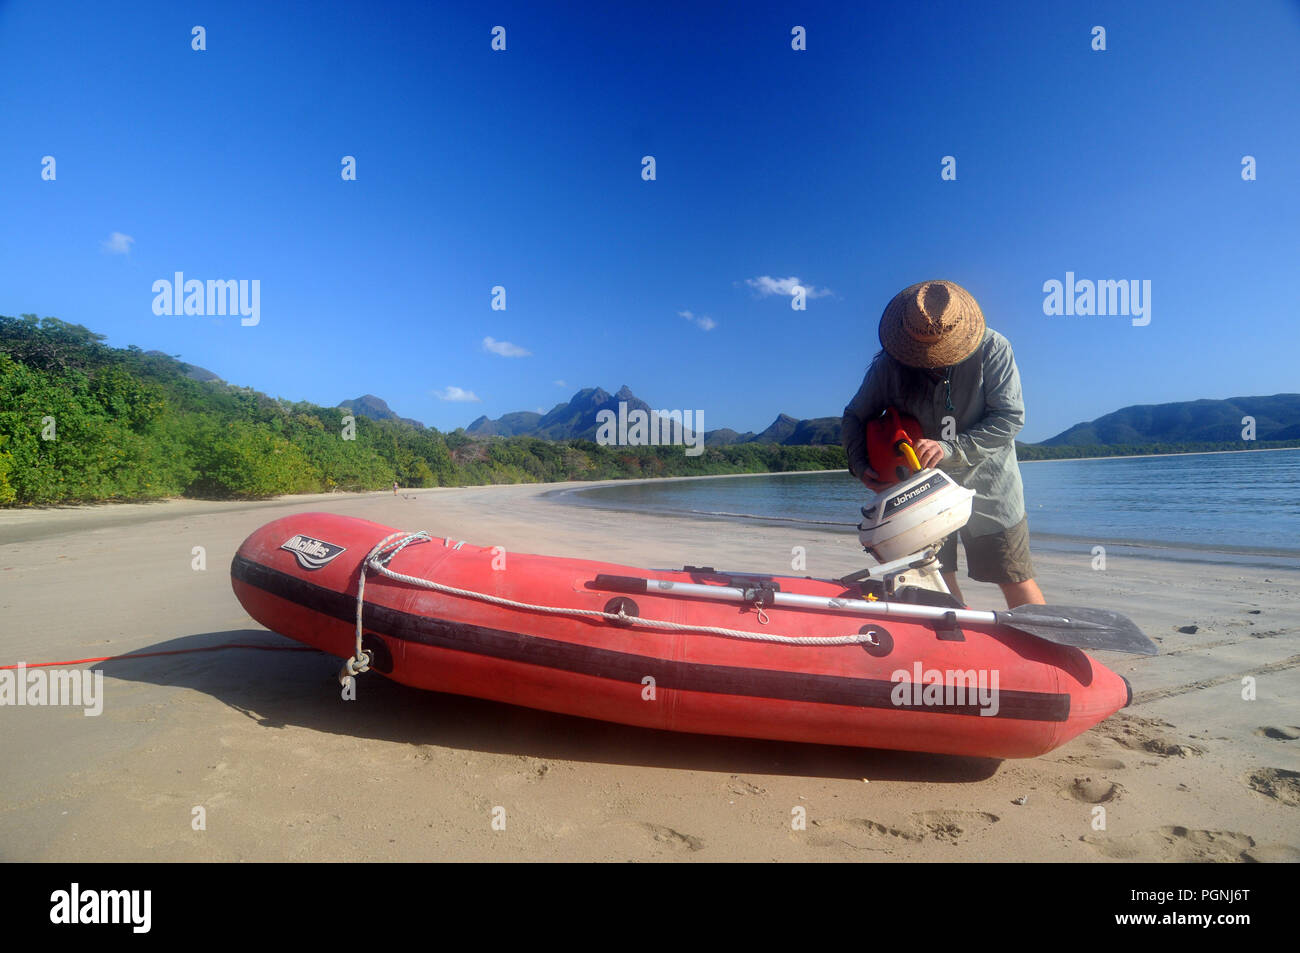 Refueling outboard on small inflatable boat, Zoe Bay, Hinchinbrook Island National Park, Queensland, Australia. NO MR or PR Stock Photo